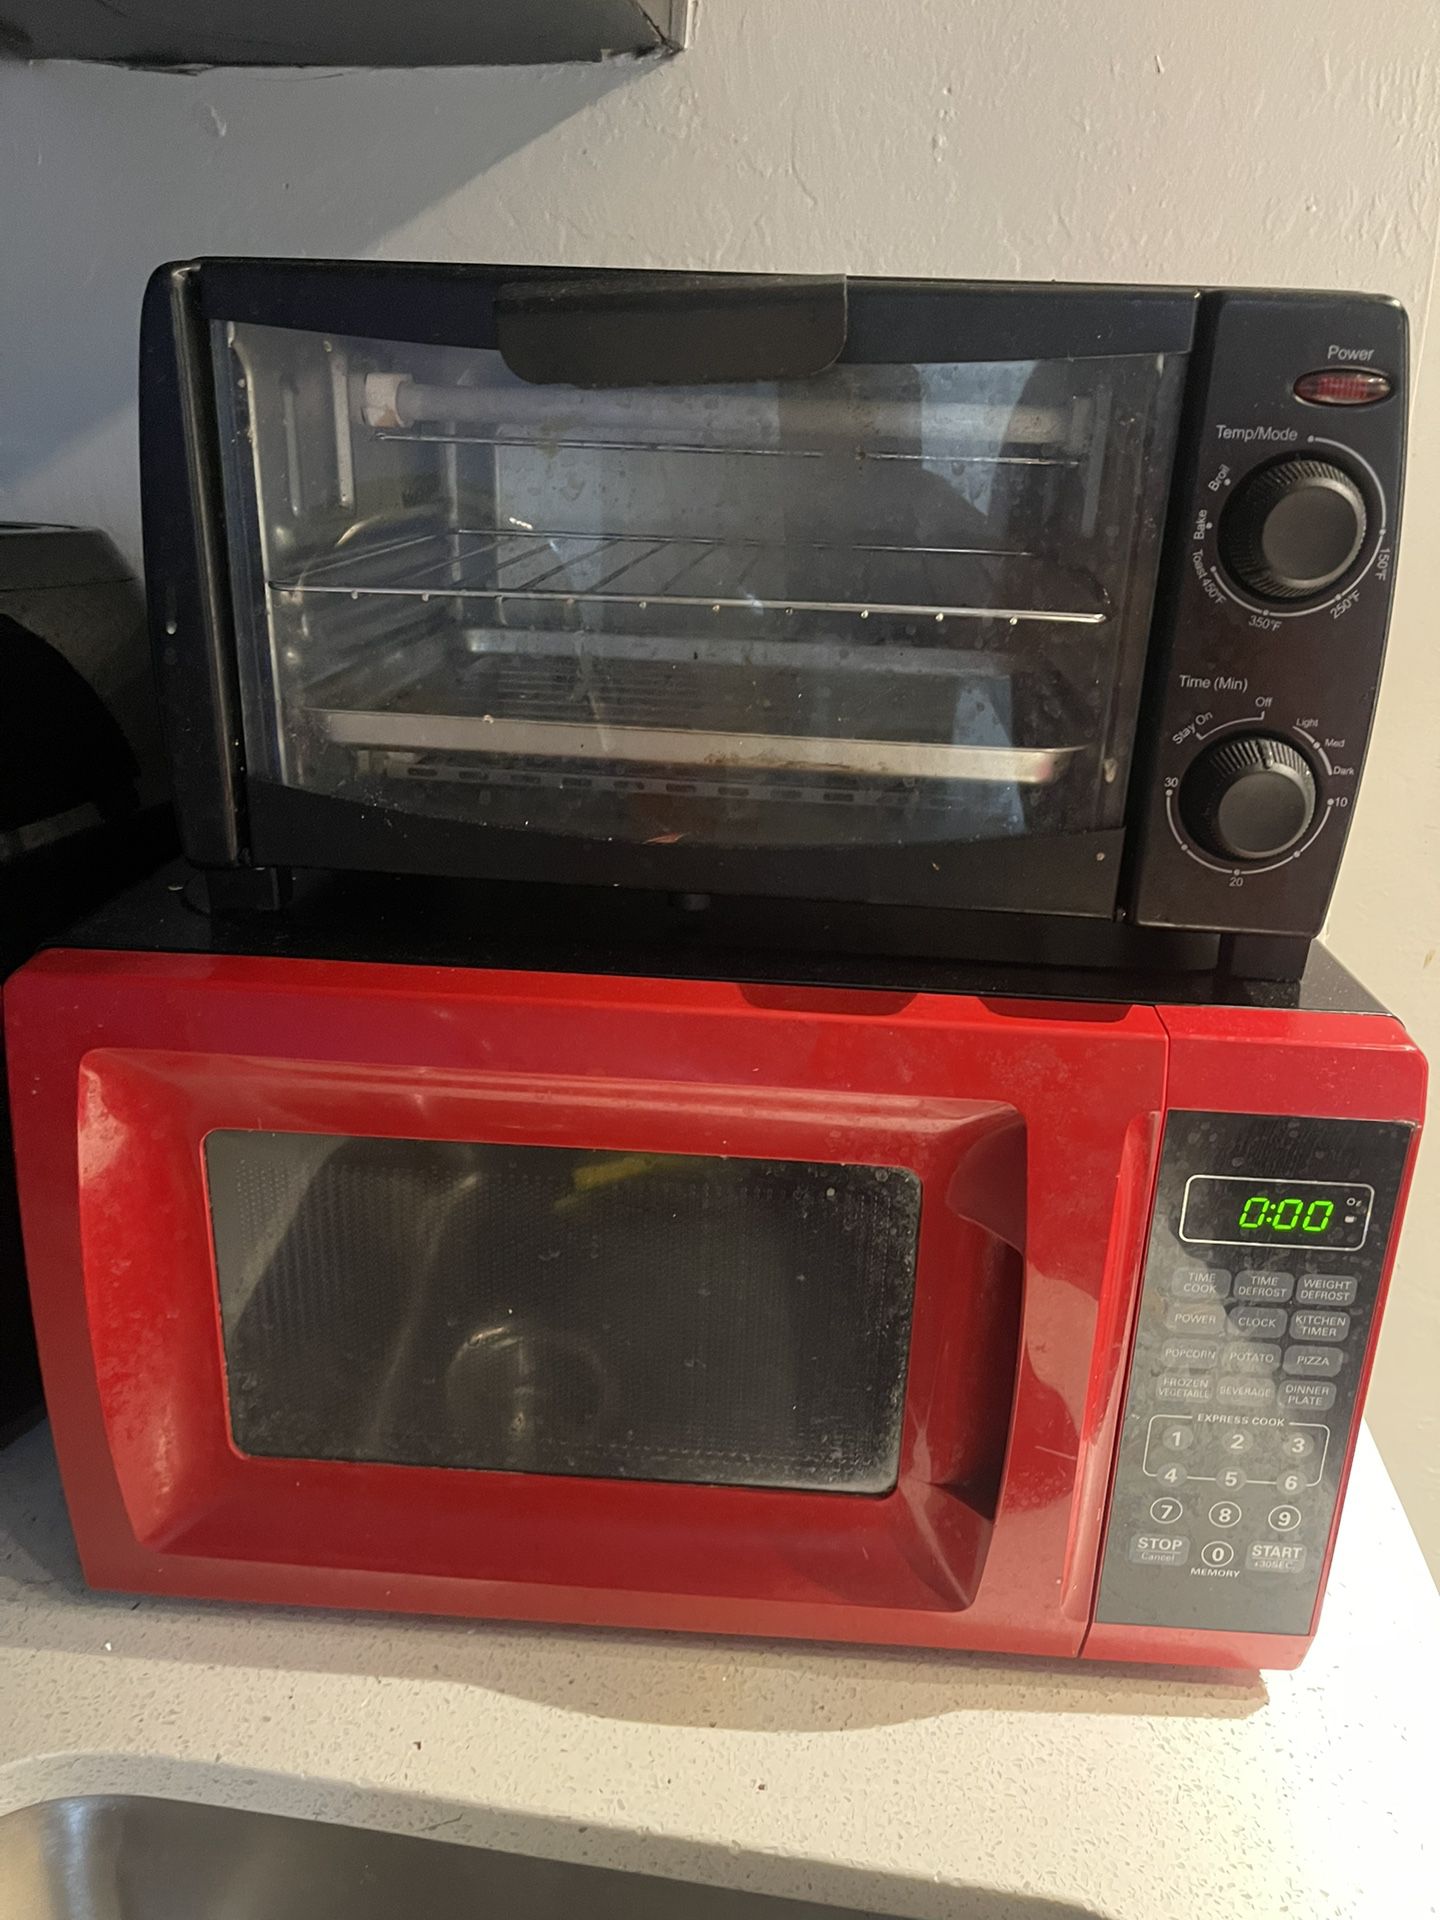 Microwave  And Toaster $40